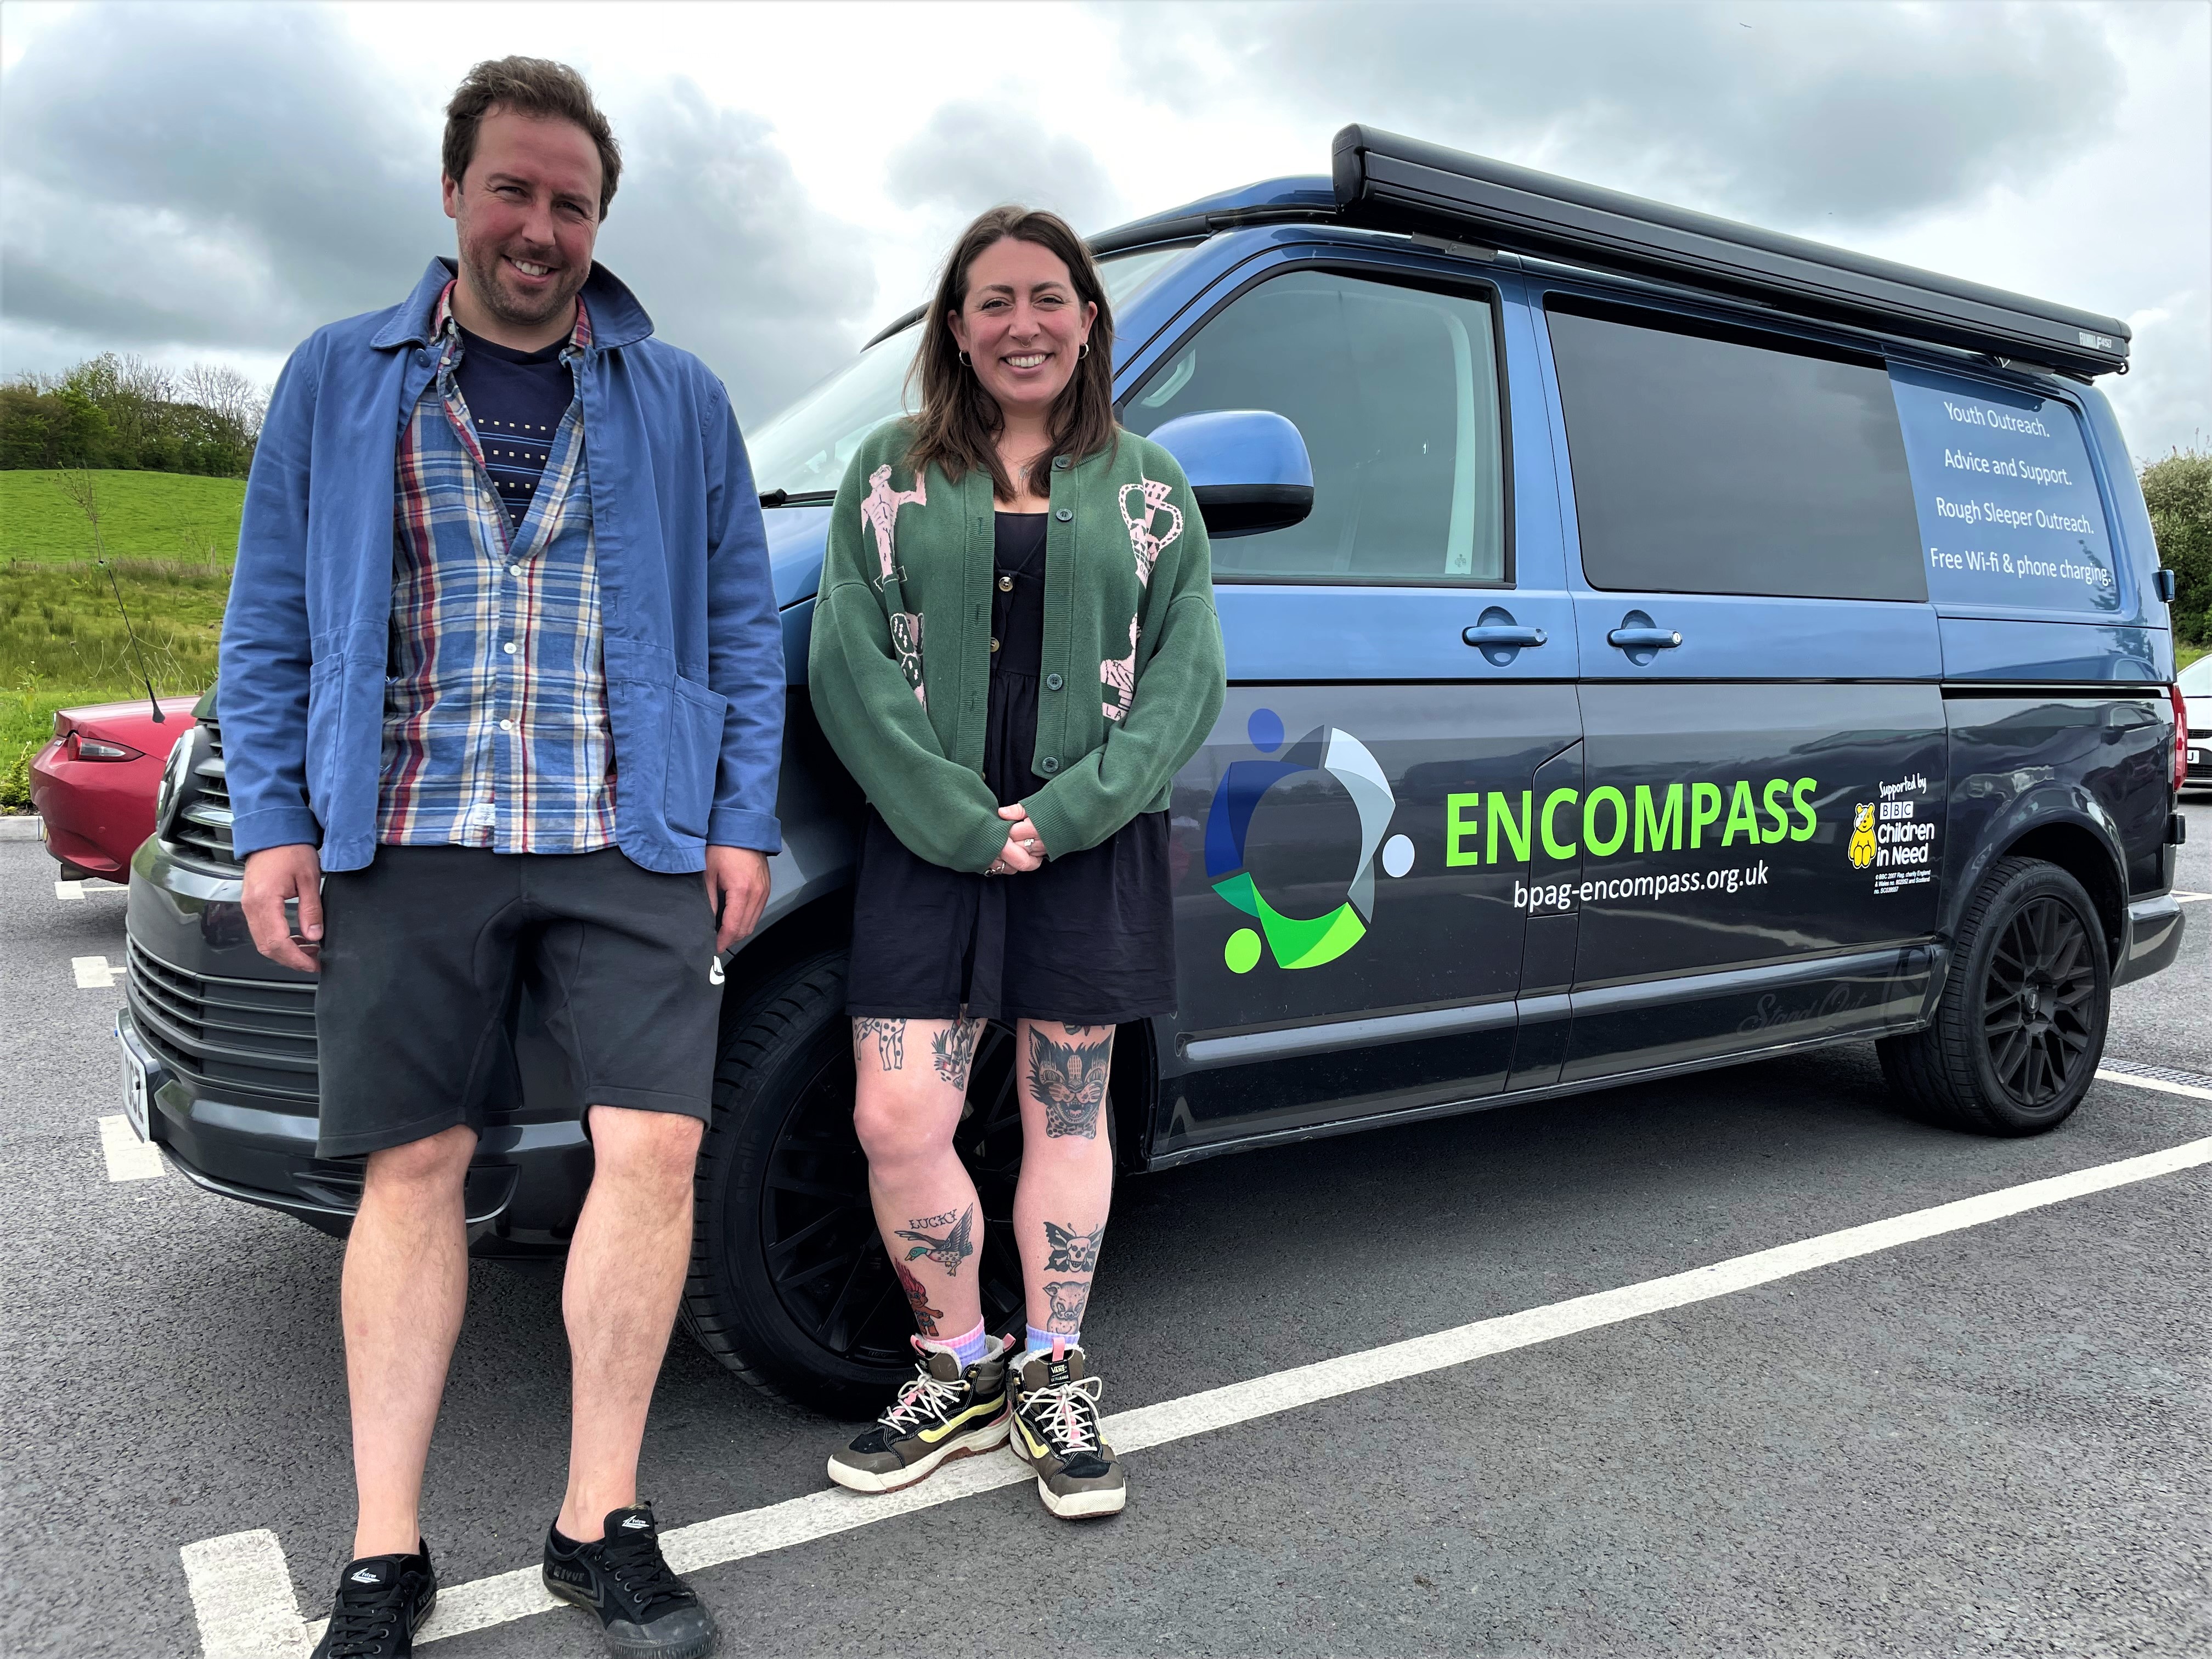 Youth workers Emma Bass and James Moss from The Junction Project with the new outreach camper van funded by BBC Children in Need.